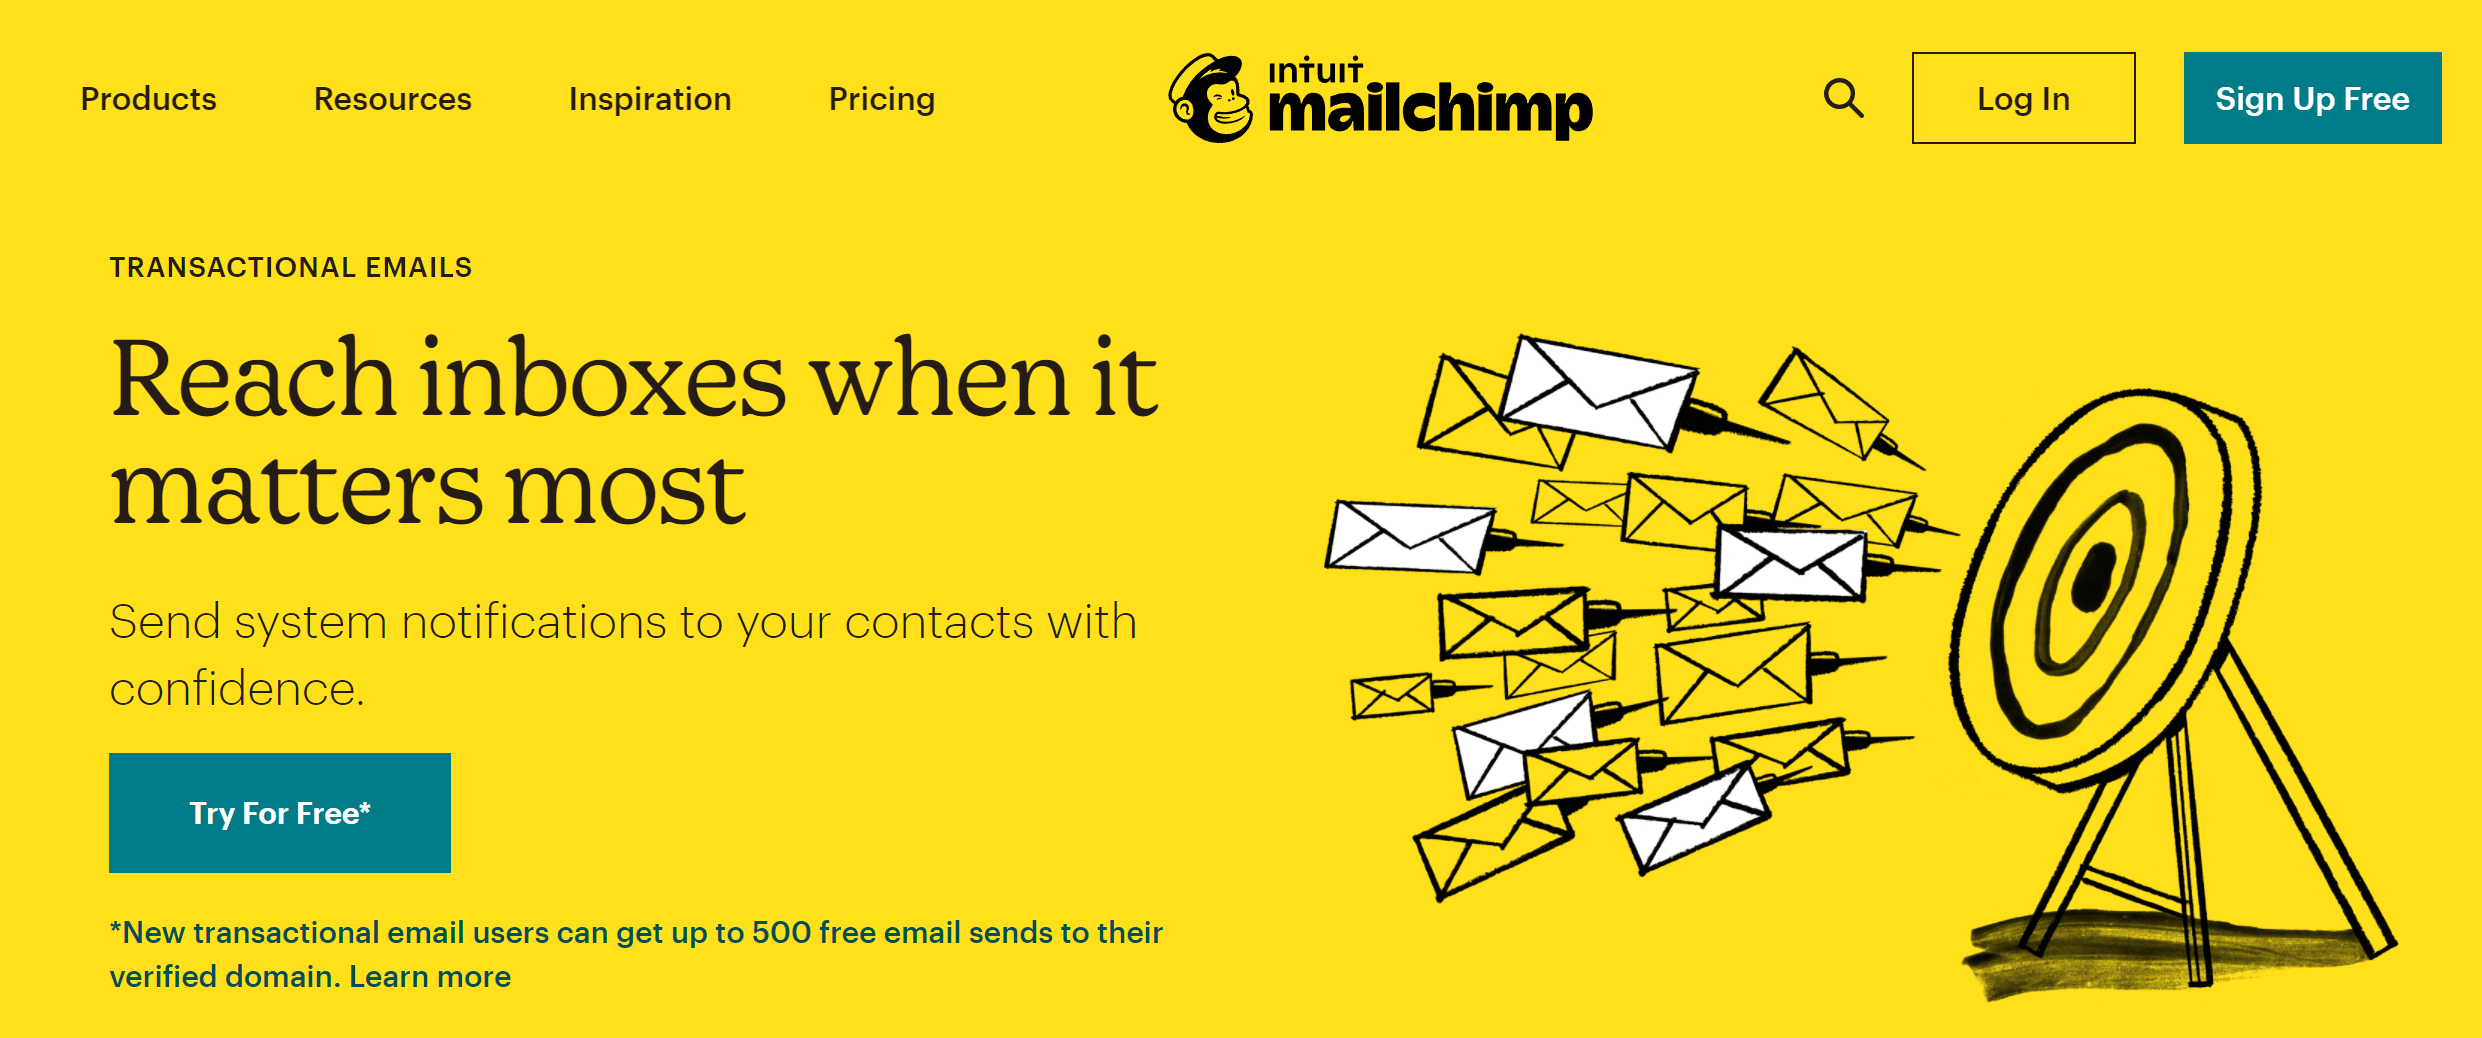 Mailchimp Transactional Email smtp add-on service